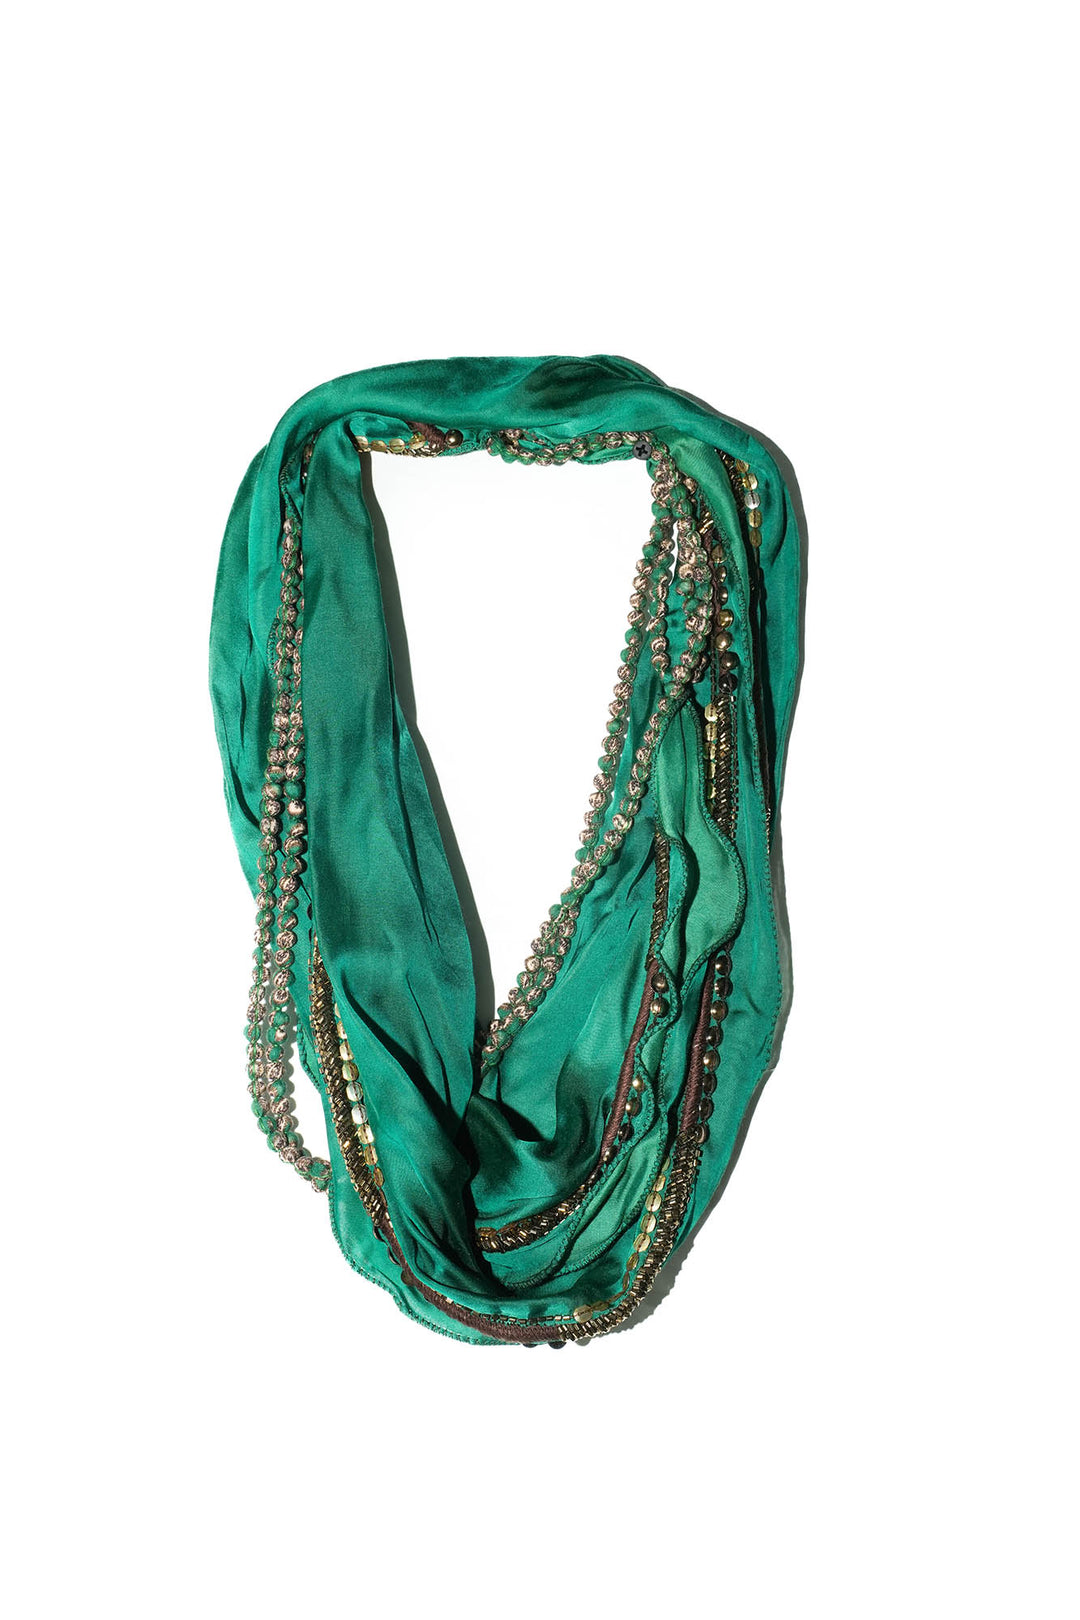 Indian Heritage Green Necklace Scarf